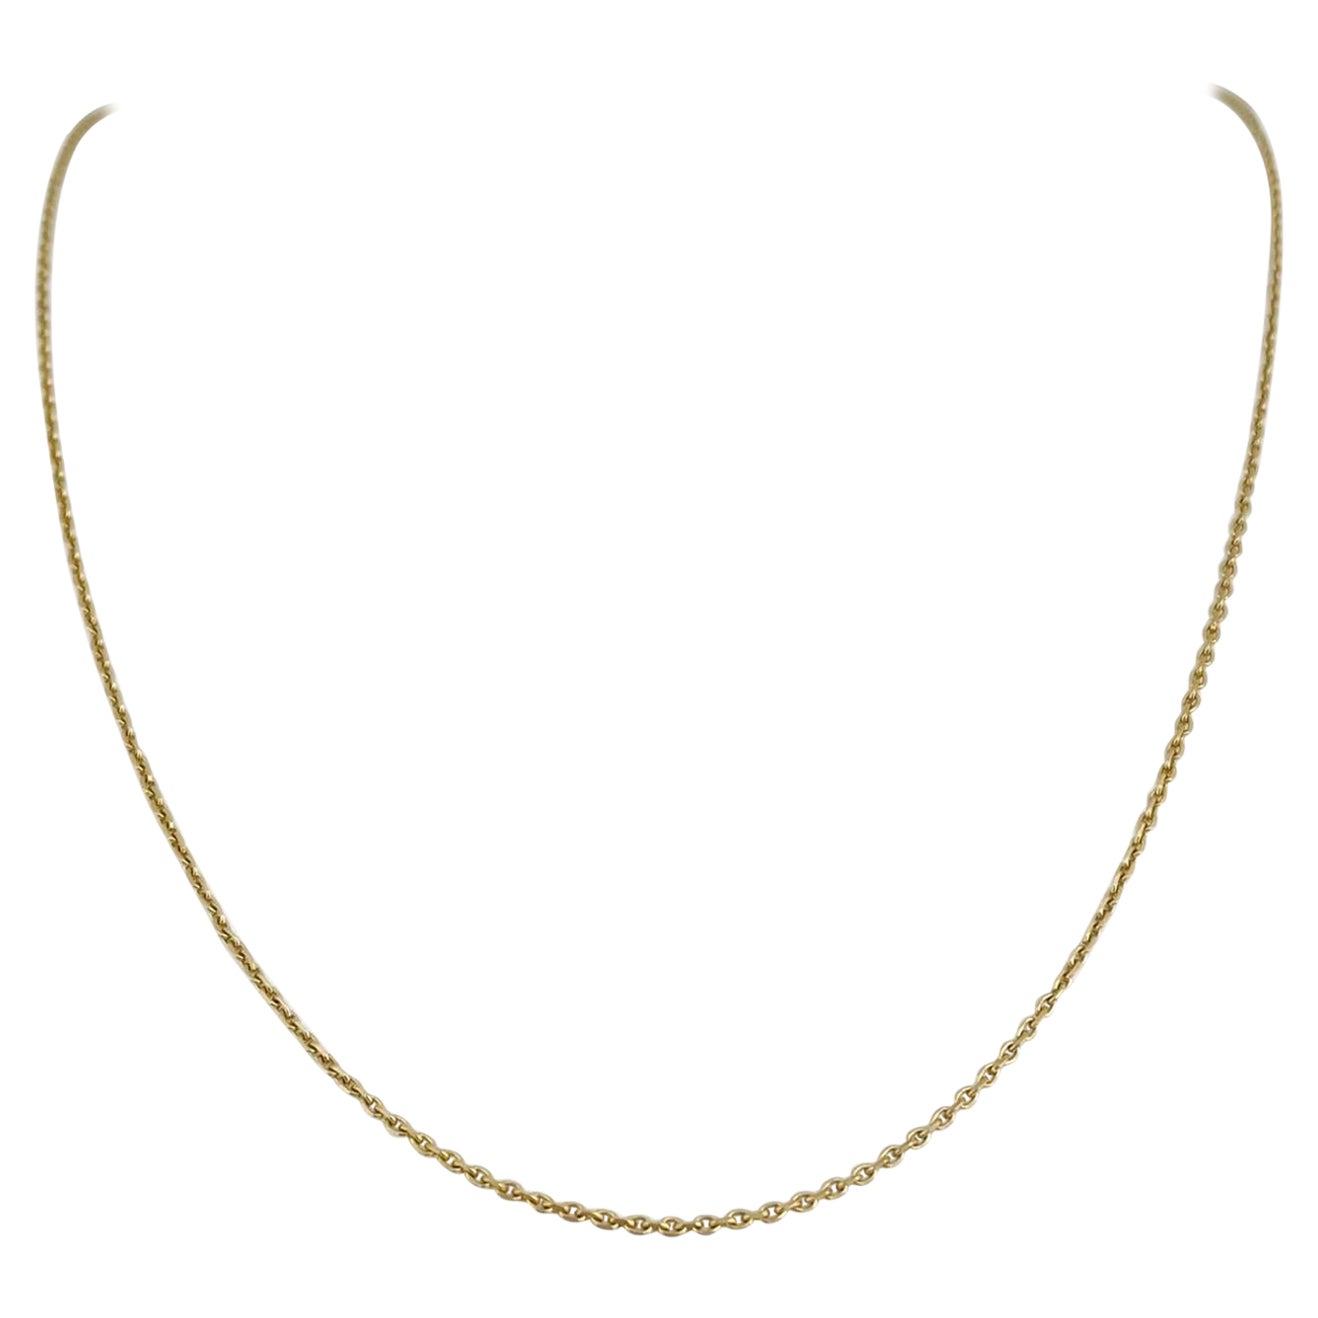 18 Karat Yellow Gold Solid Very Thin Cable Link Chain Necklace 